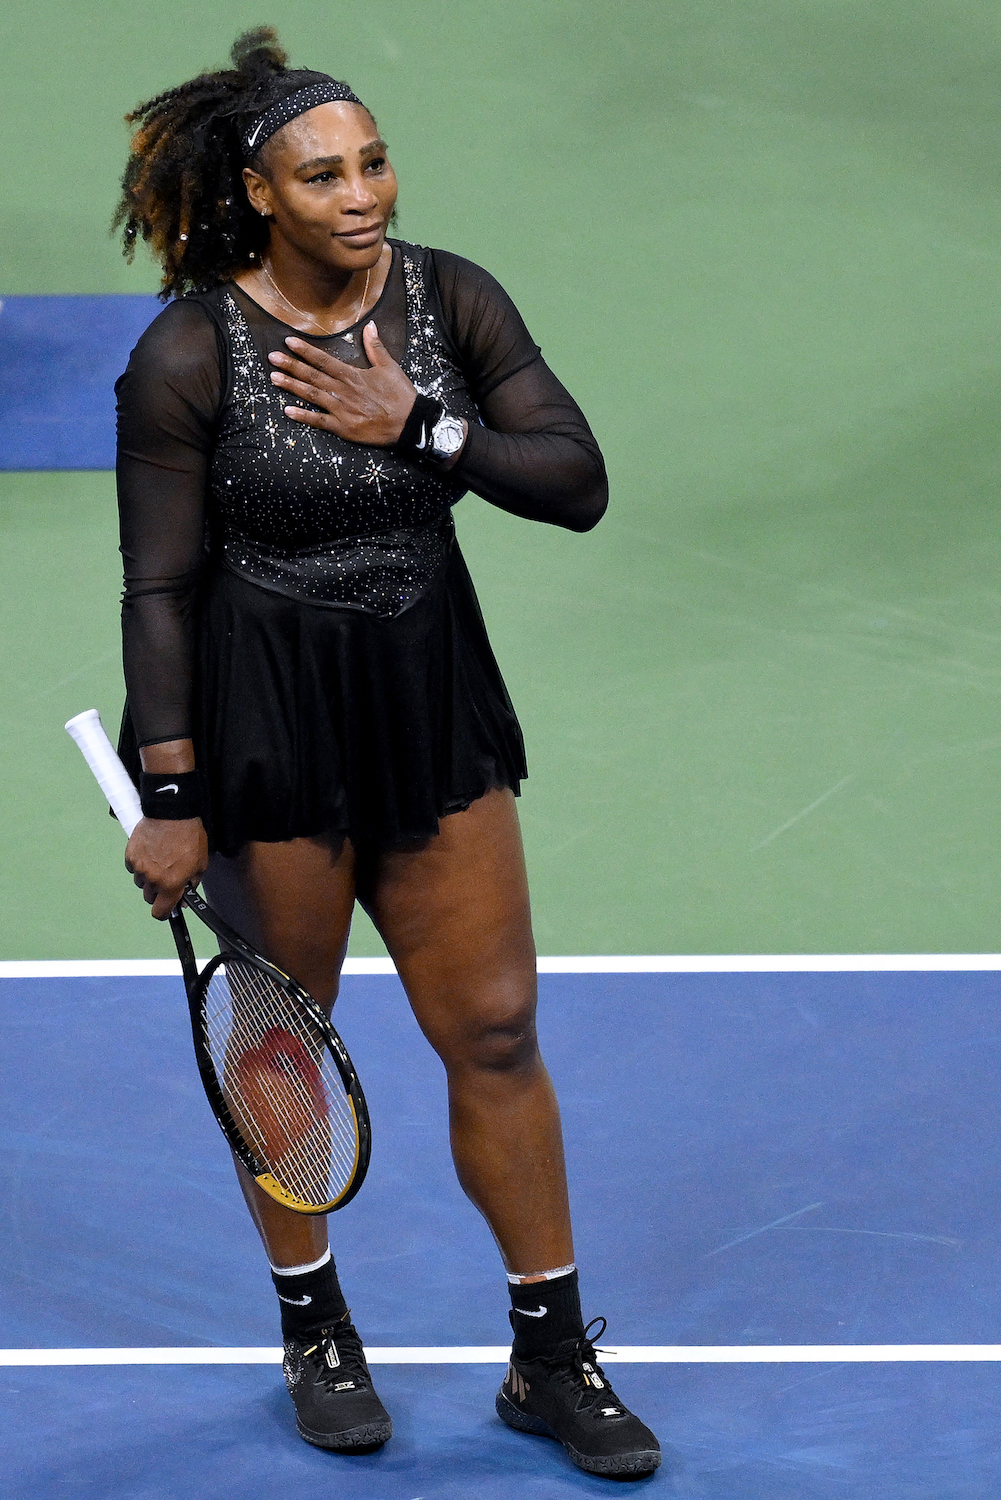 Women's Month: Serena Williams gestures to the audience after losing against Australia's Ajla Tomljanovic during their 2022 US Open Tennis tournament women's singles third round match